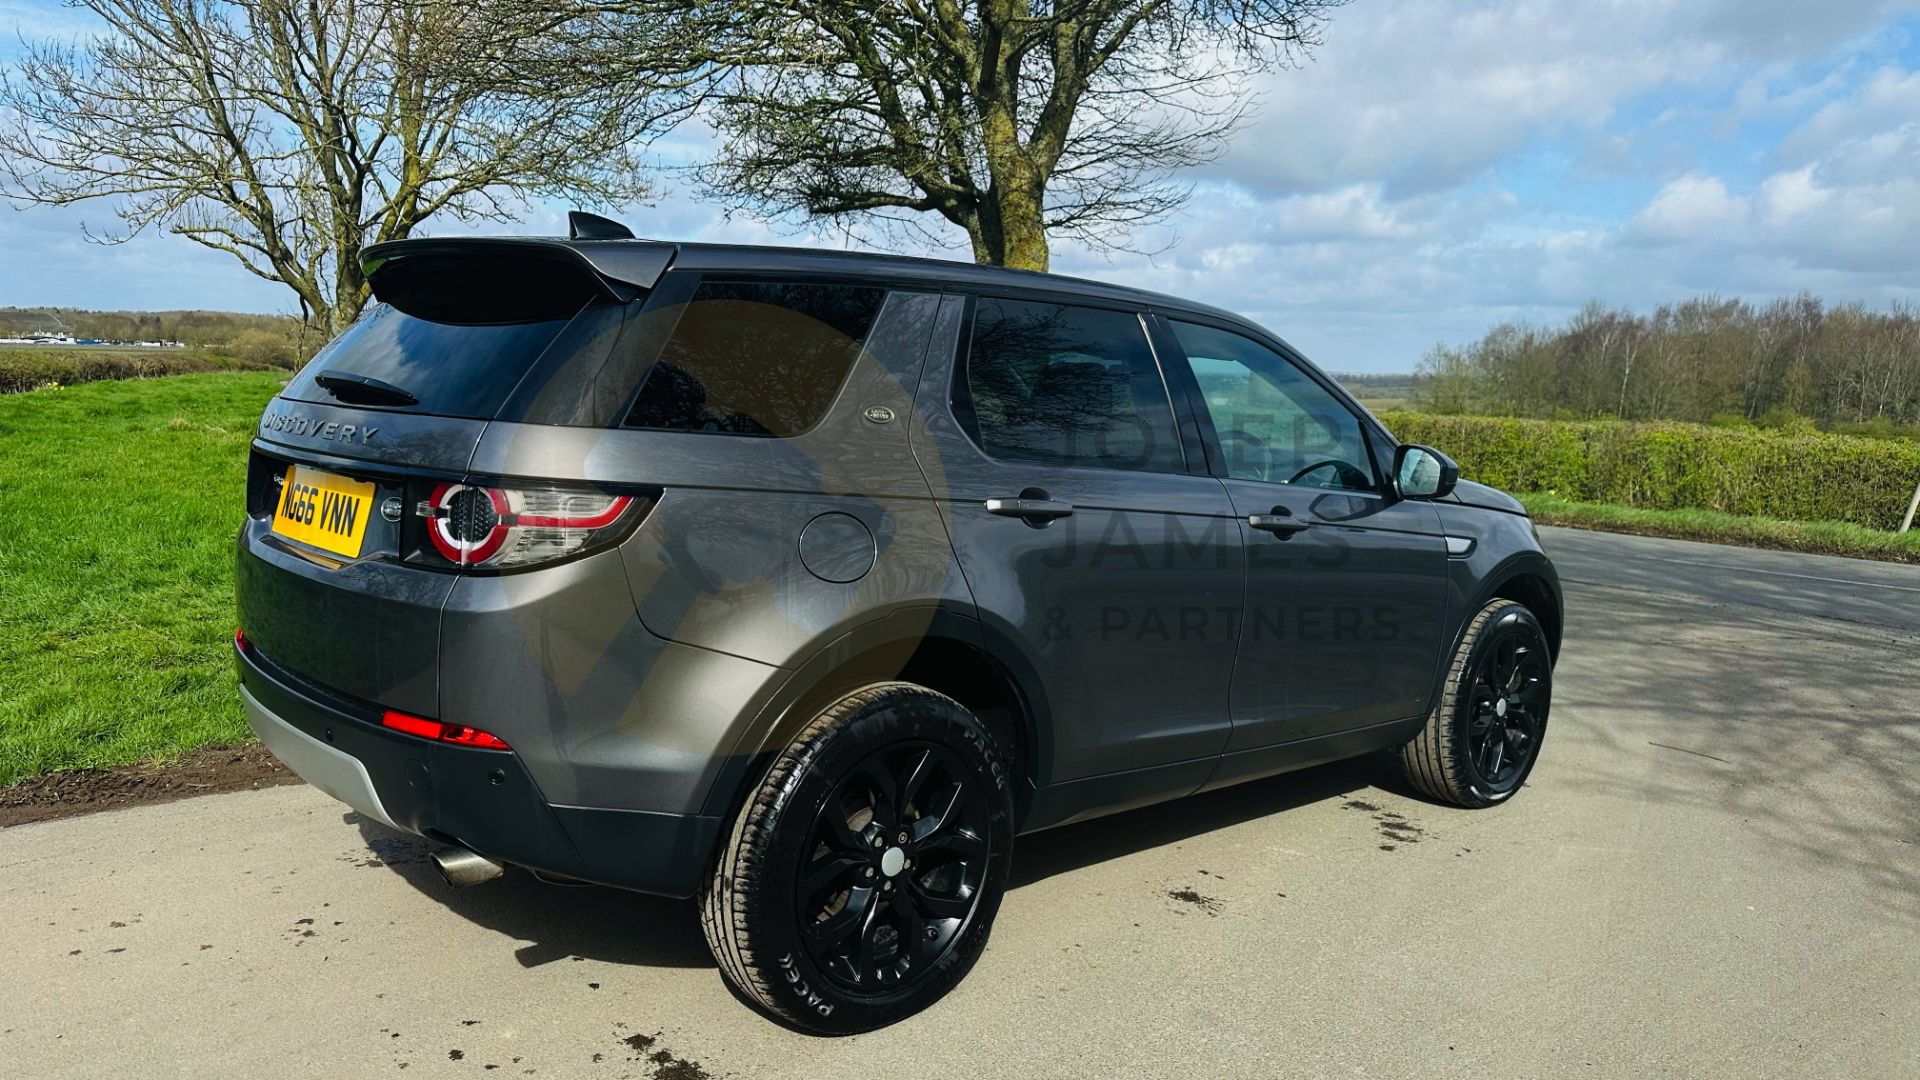 (On Sale) LAND ROVER DISCOVERY SPORT *HSE EDITION* 7 SEATER SUV (2017 - EURO 6) 2.0 TD4 - AUTOMATIC - Image 12 of 48